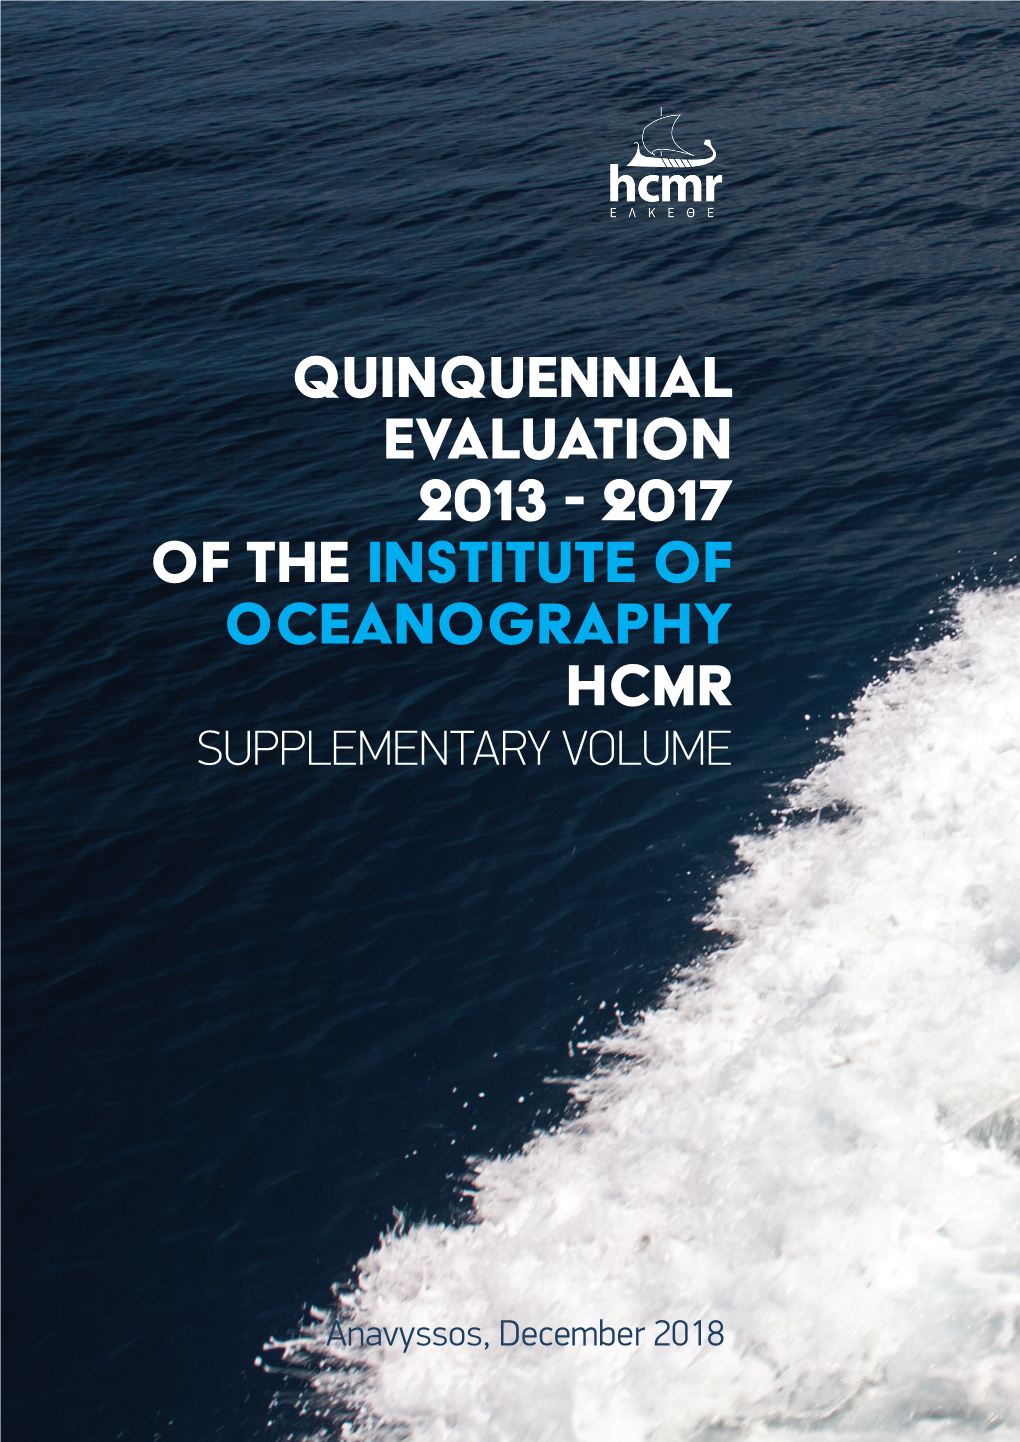 Quinquennial Evaluation 2013 - 2017 of the Institute of Oceanography HCMR SUPPLEMENTARY VOLUME